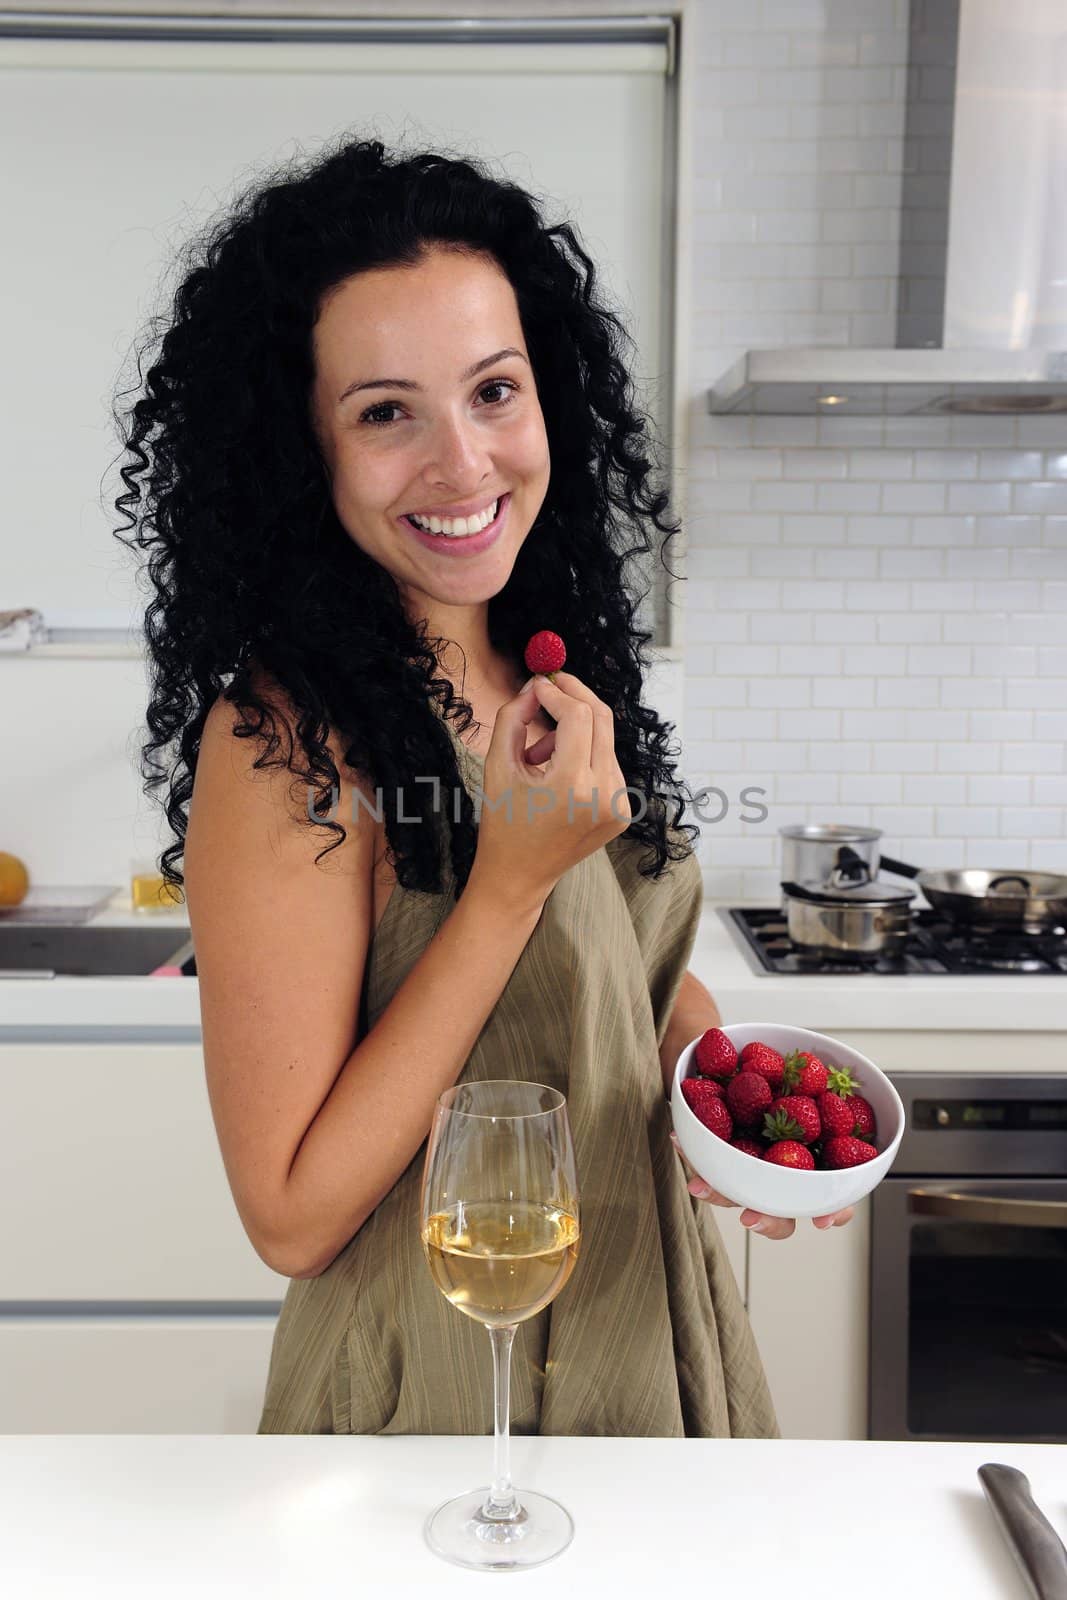 Woman eating strawberries and drinking wine